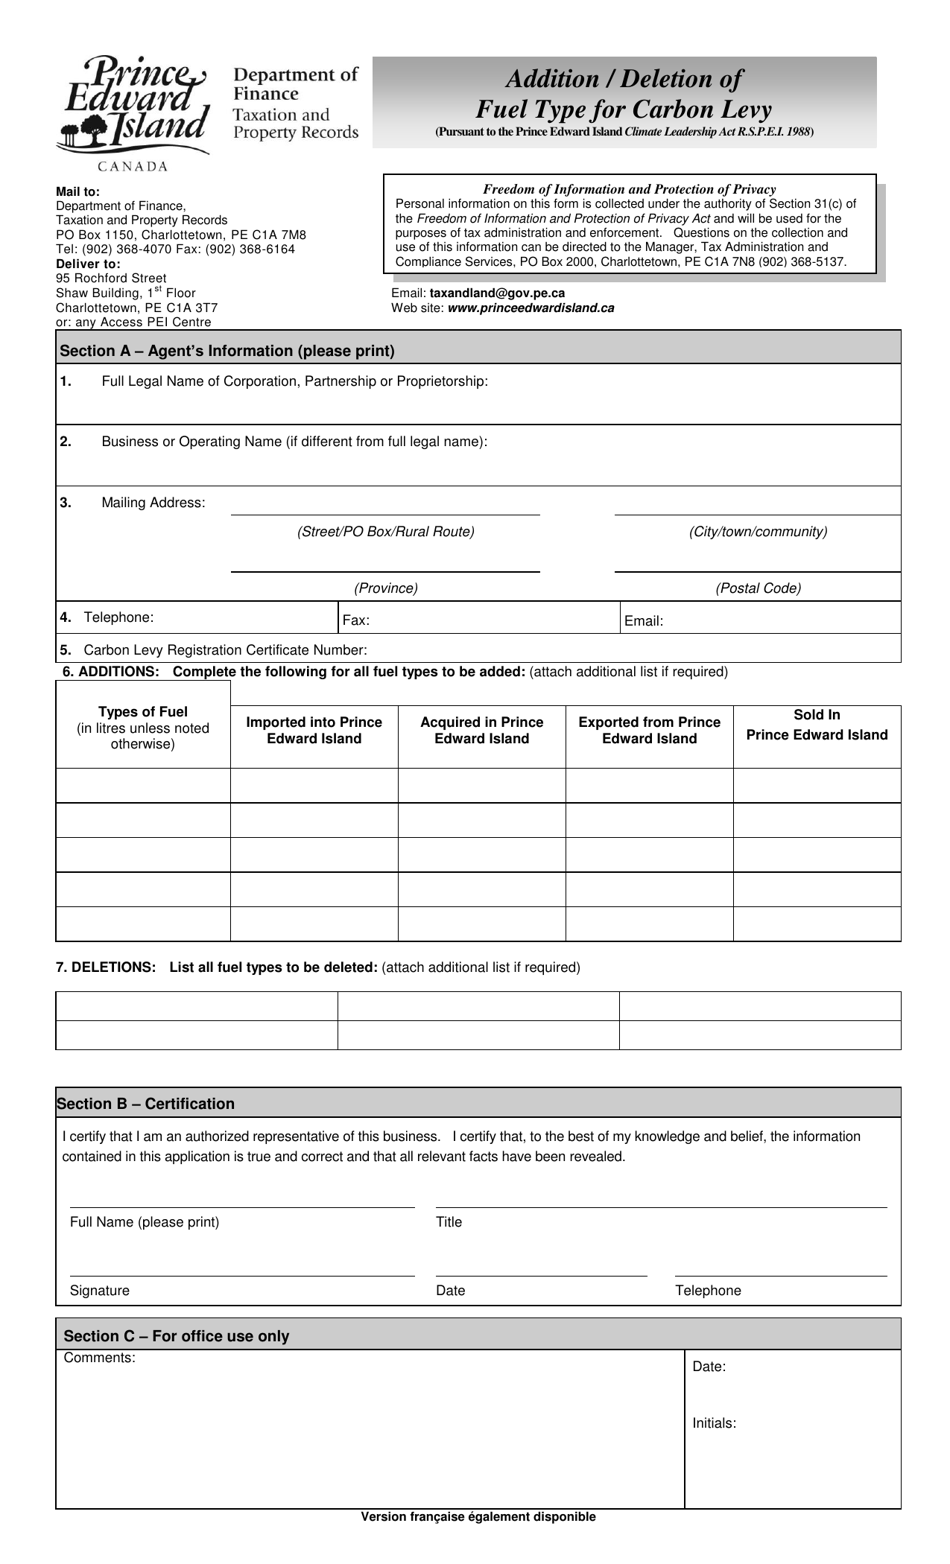 Addition / Deletion of Fuel Type for Carbon Levy - Prince Edward Island, Canada, Page 1